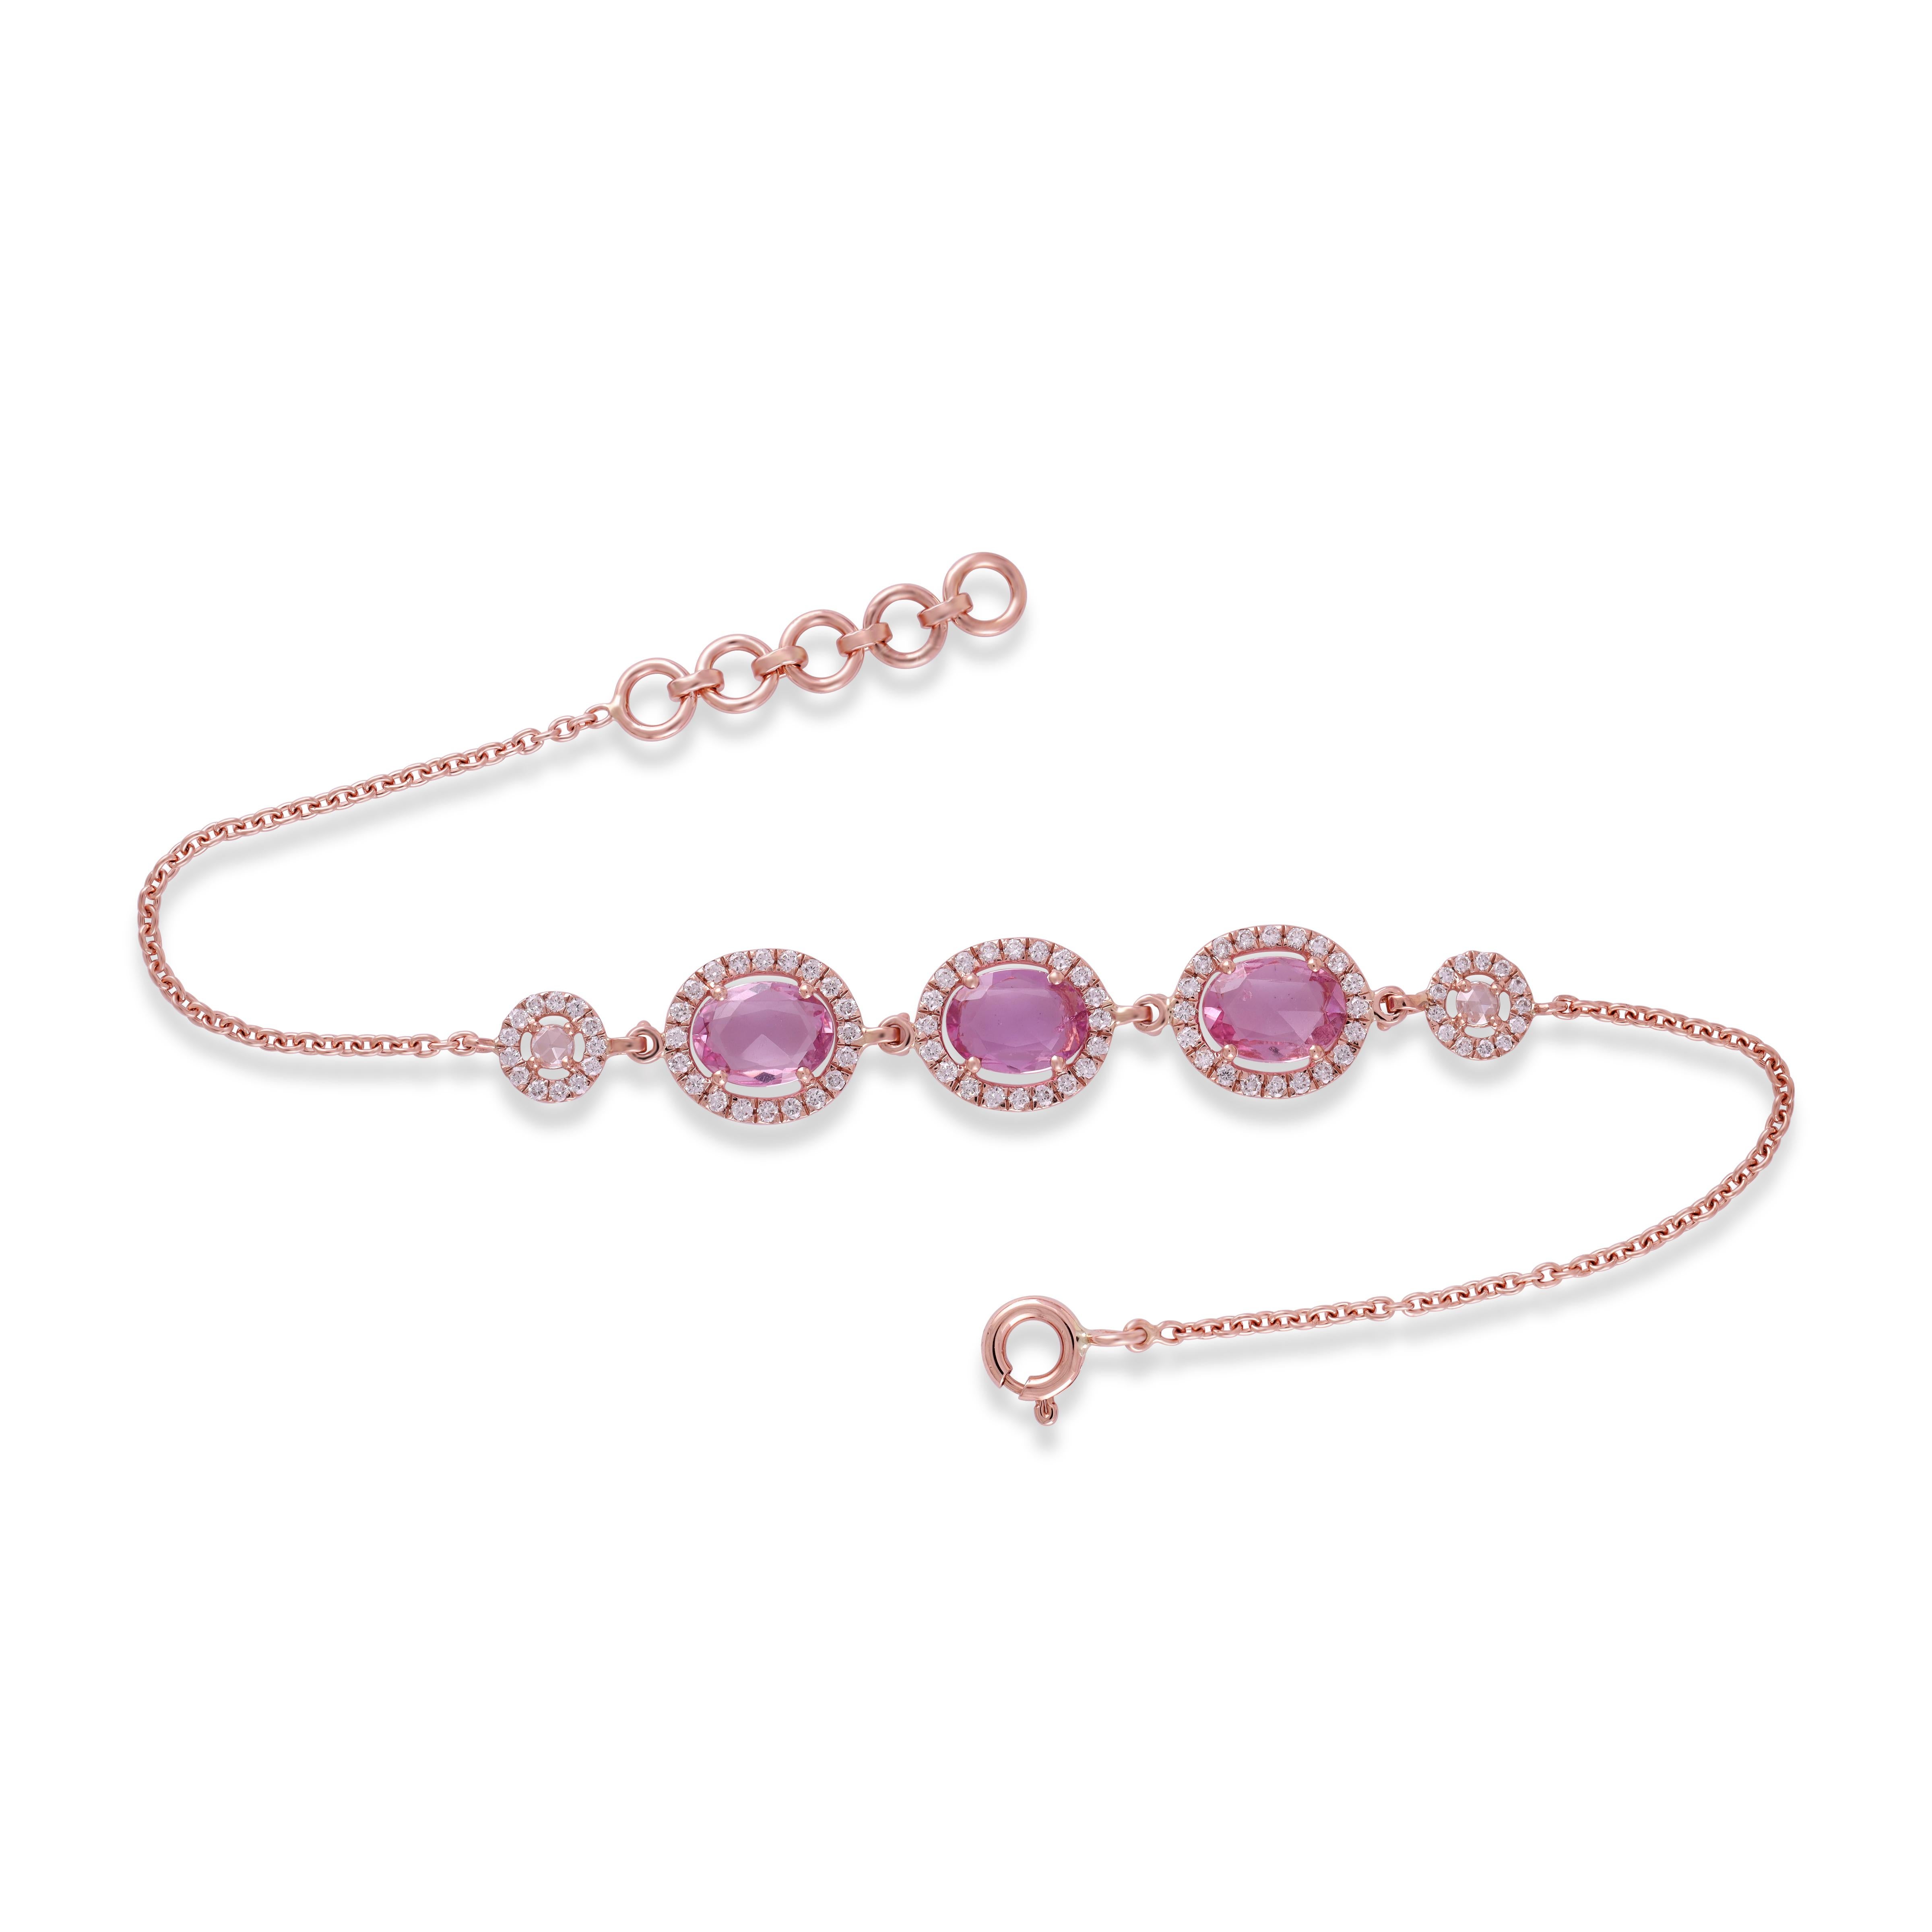 A very beautiful and dainty Pink Sapphire Chain Bracelet let in 18K Rose Gold & Diamonds. The weight of the Multi Sapphires is 2.63 carats. The weight of the Diamonds is 0.66 carats. 
 Bracelet size - 6 -7 inches and can be Resize.
